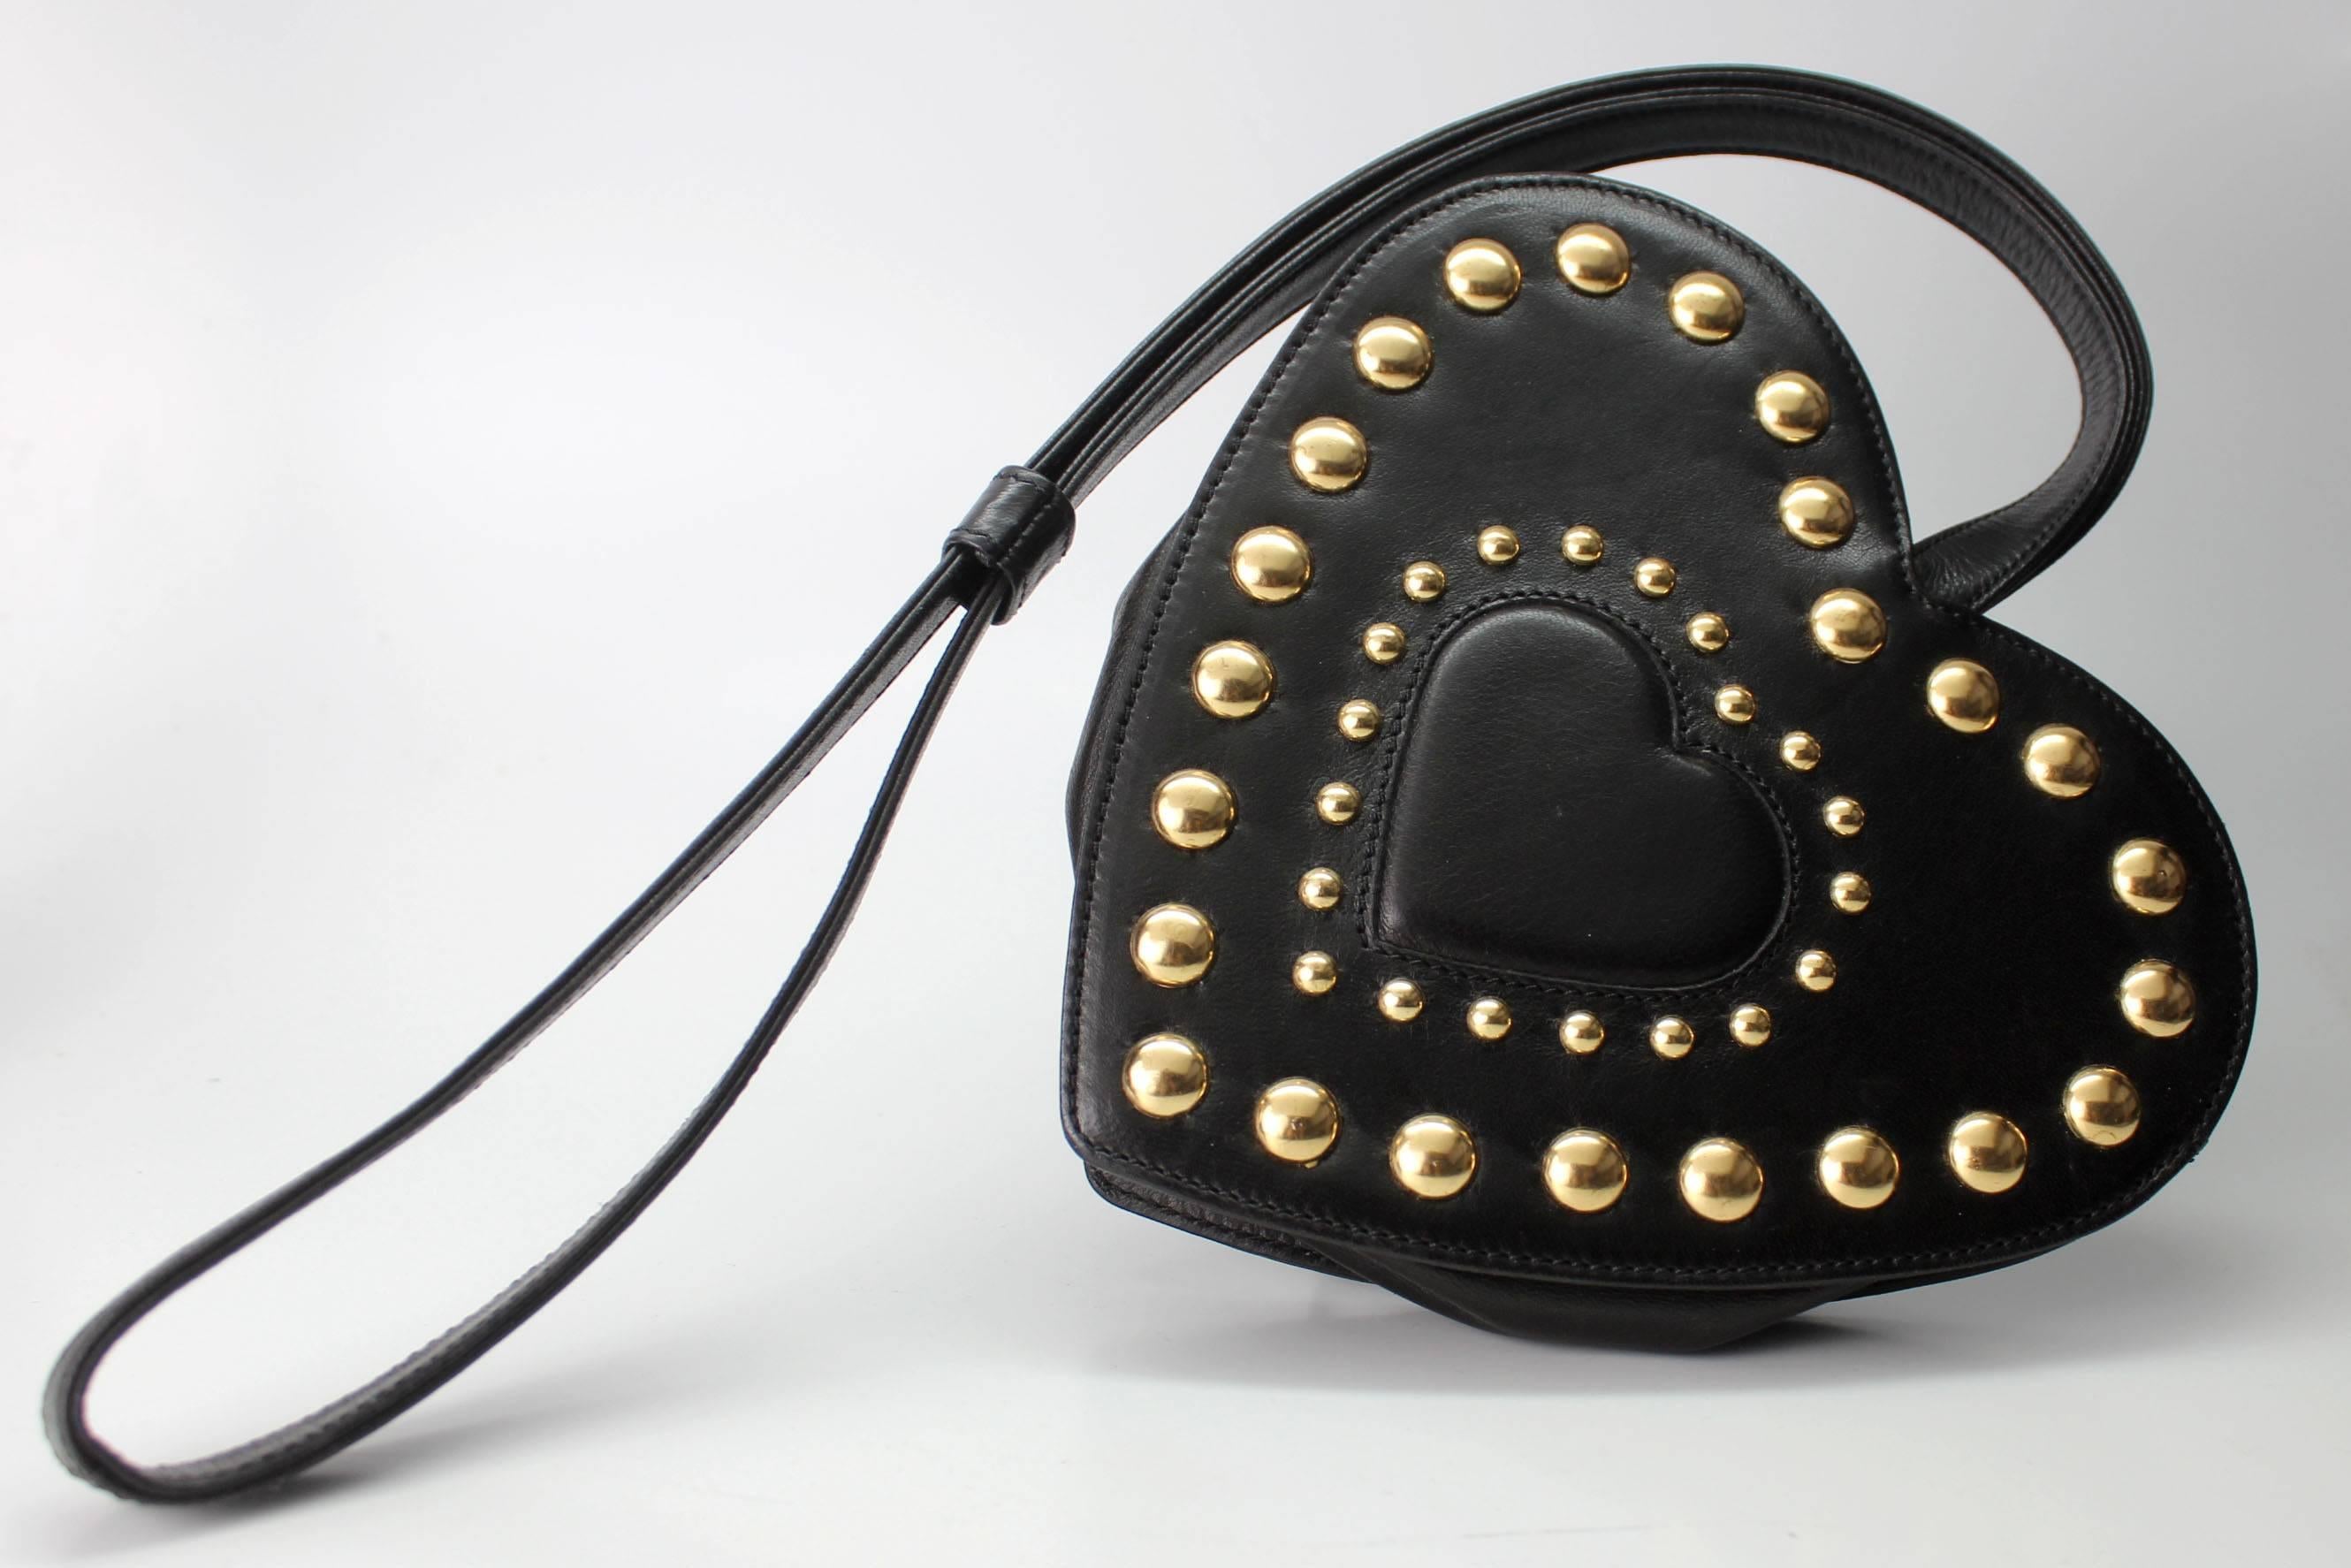 This 1980's handbag is pure Moschino with its whimsical design in the shape of a studded heart. It has a shoulder strap and folds flat but expands with enough room to carry essentials. It is stamped Moschino Redwall and comes complete with dustbag.